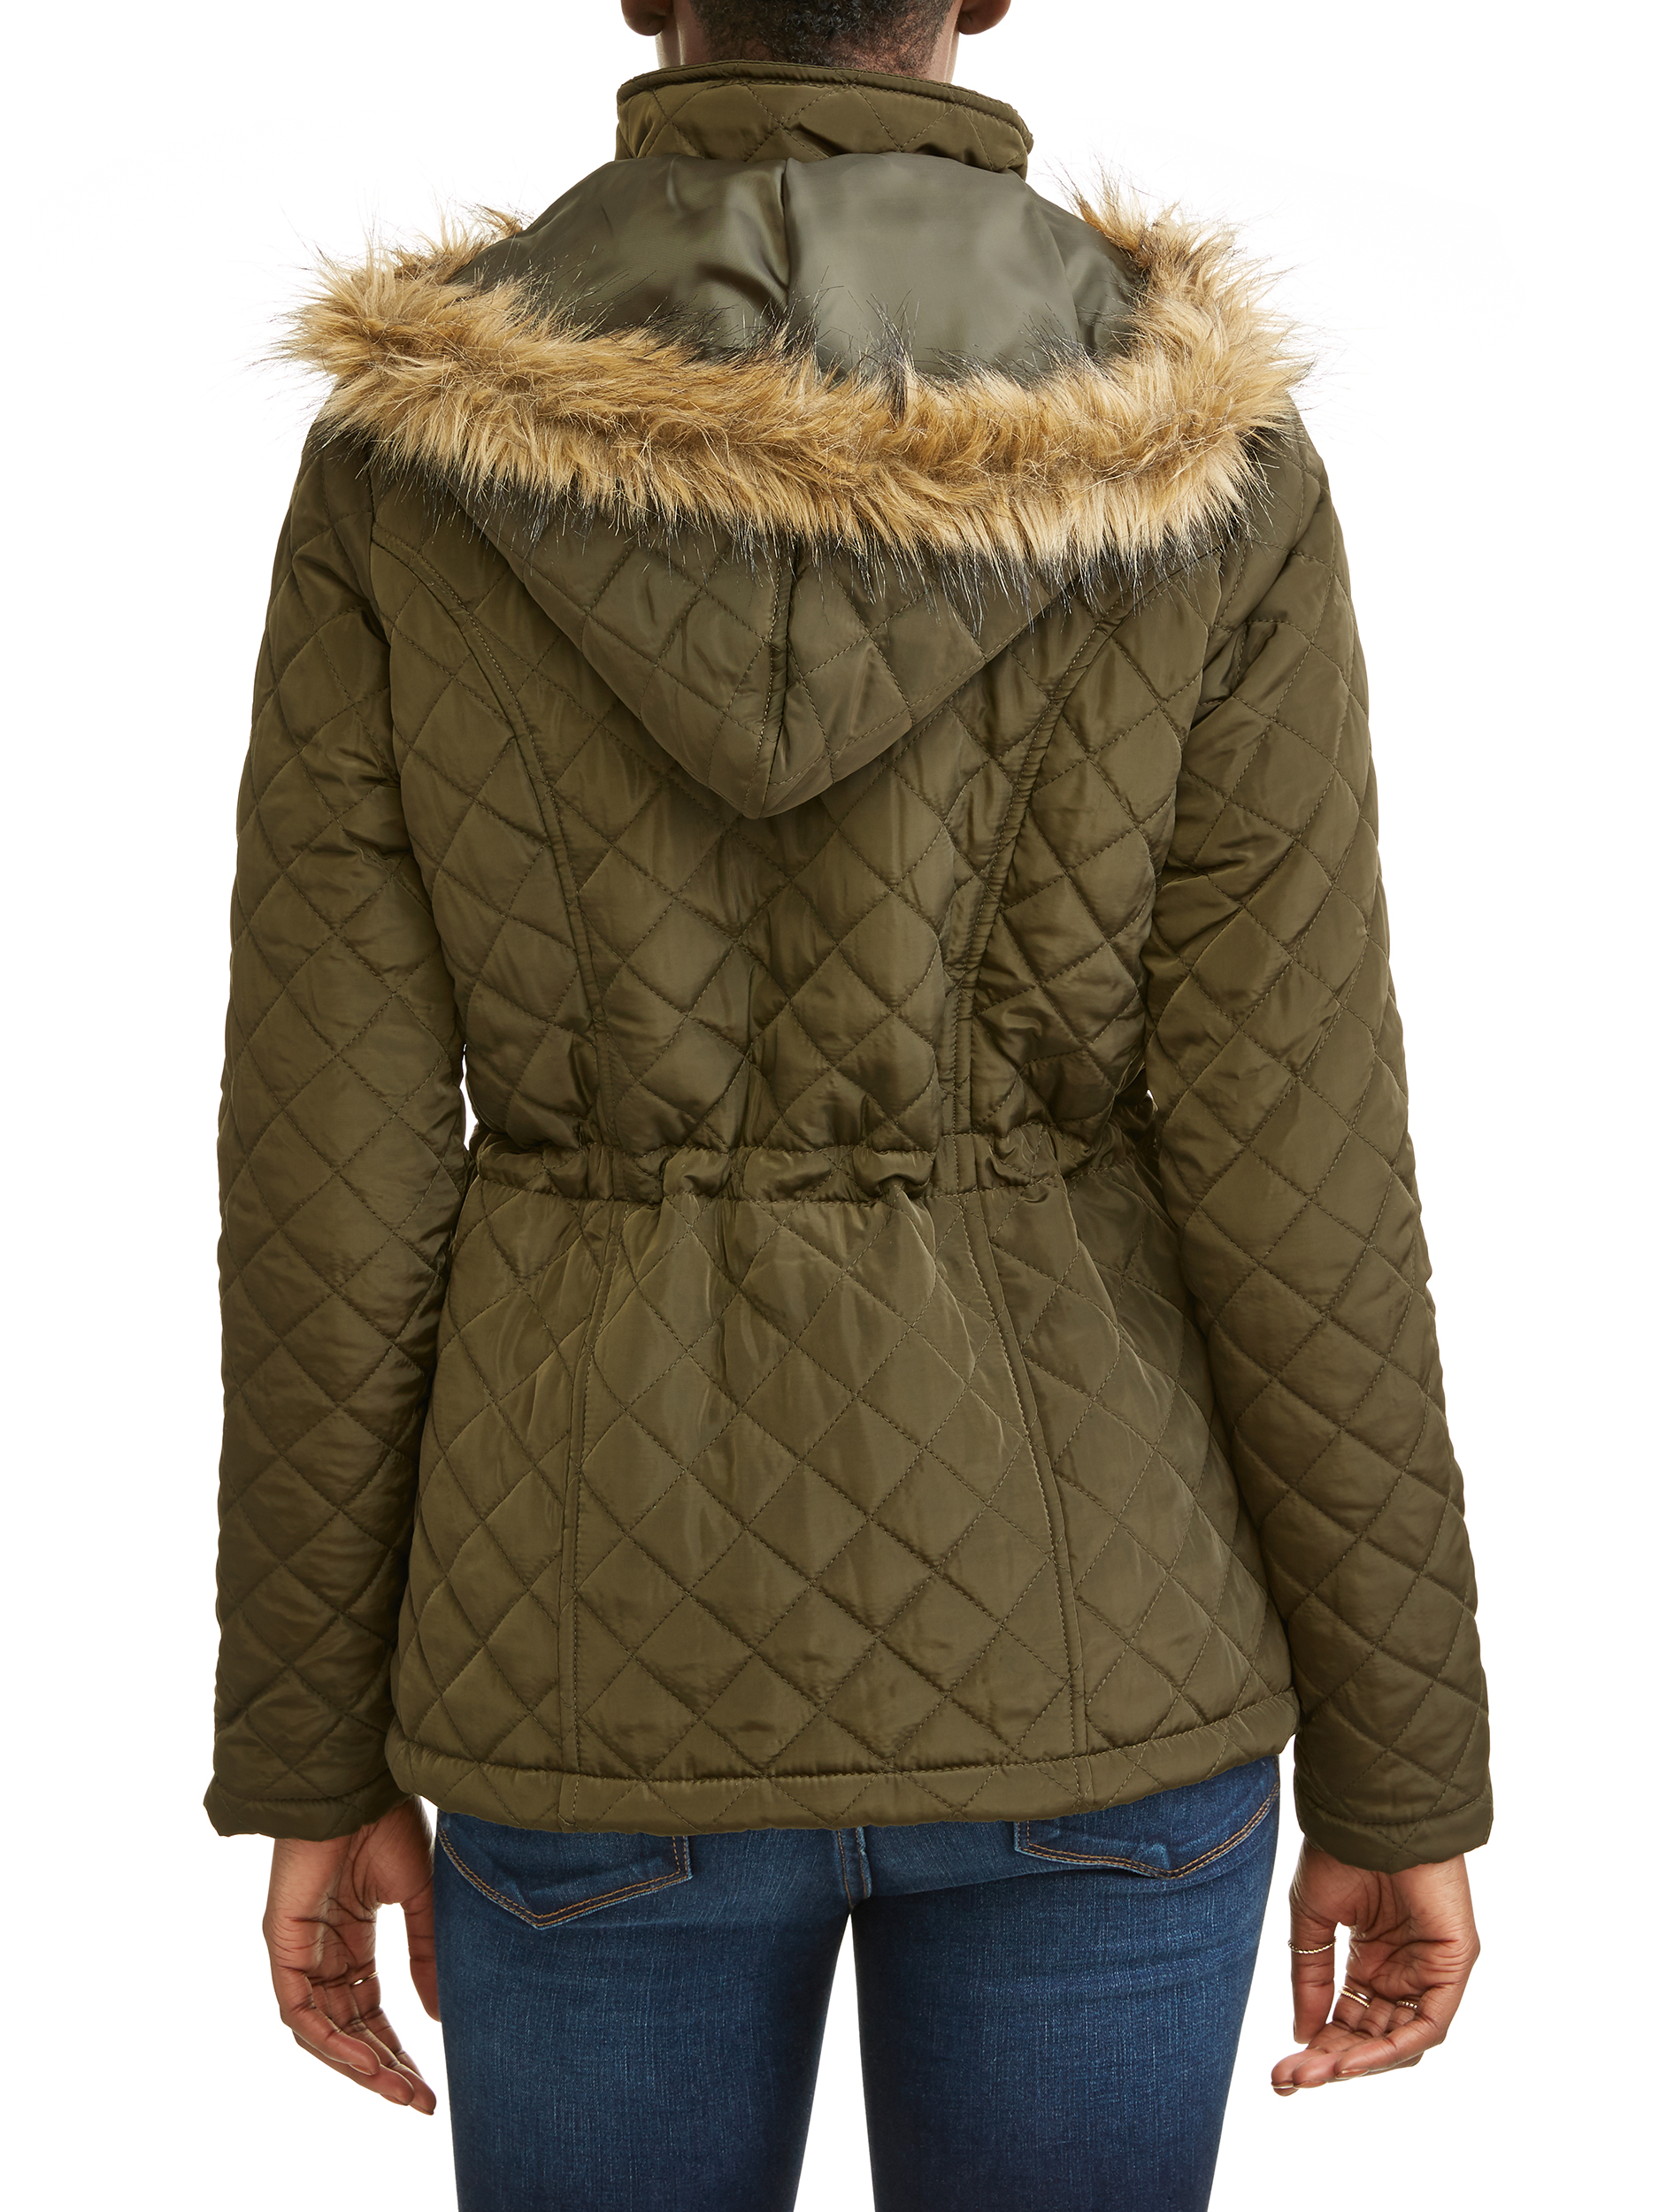 Women's Quilted Anorack With Faux Fur Hood - image 2 of 4